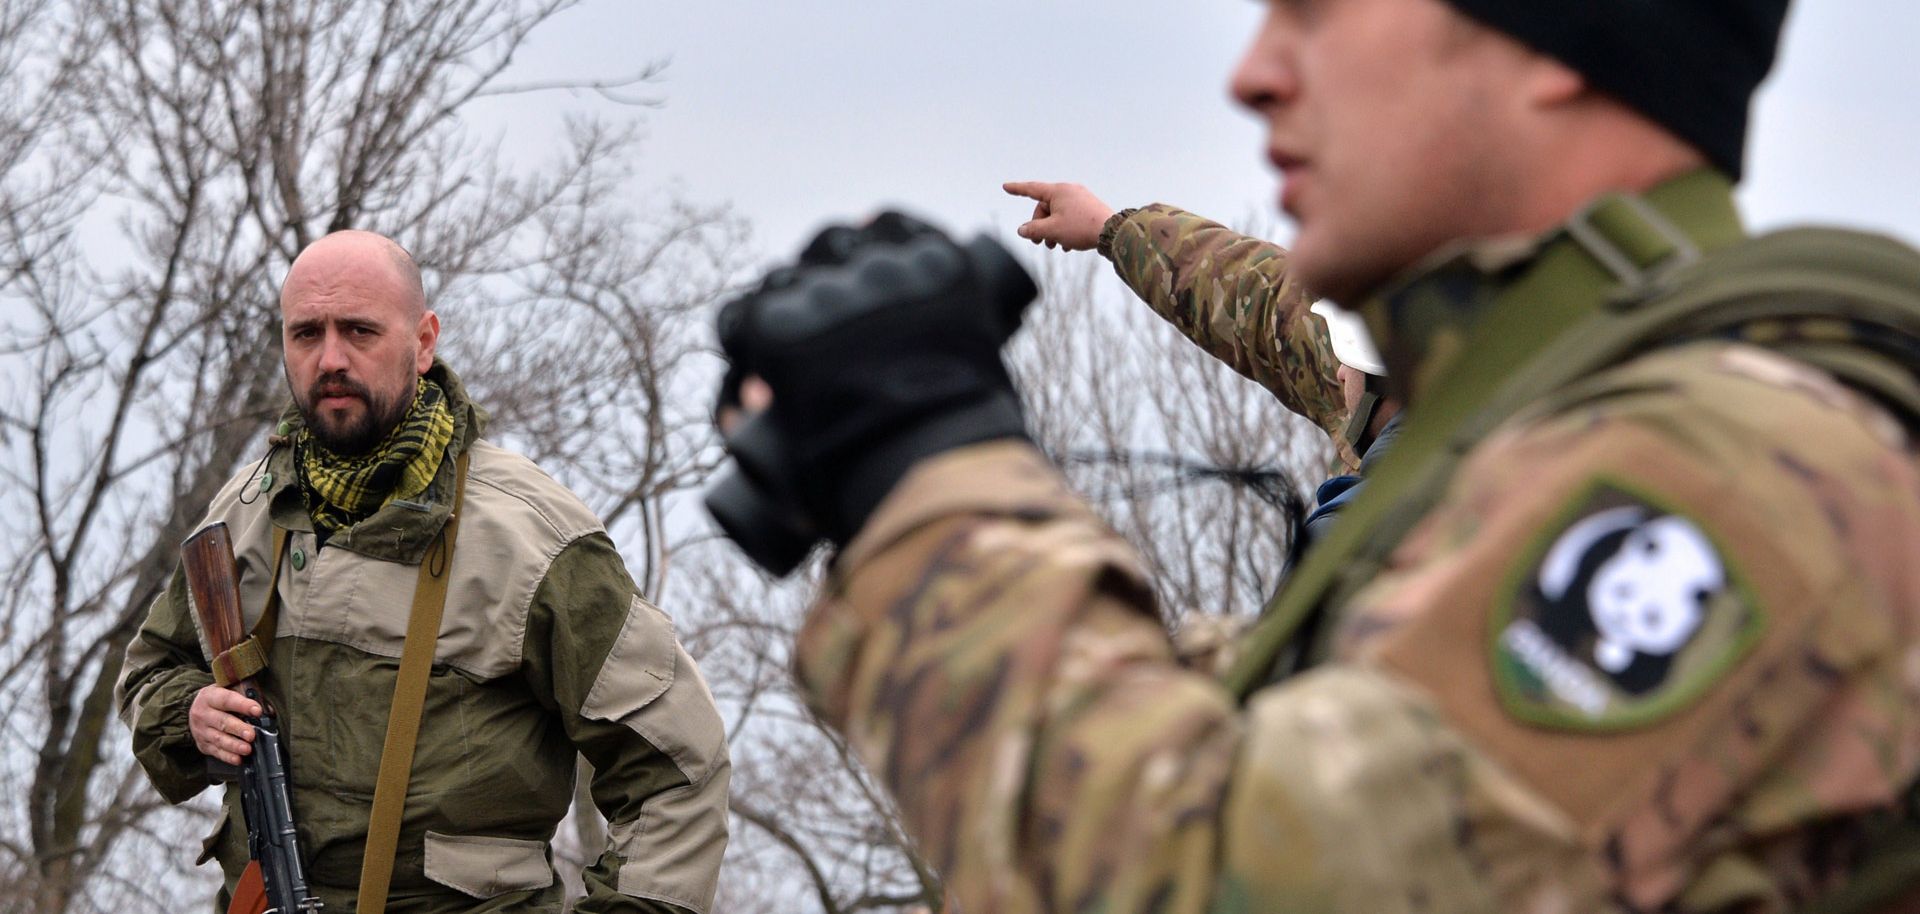 Ukrainian volunteers from the Dnipro-1 battalion, funded by Igor Kolomoisky to combat pro-Russia separatists, observes from a position in the village of Chermalyk 40 km northeast of Mariupol on February 26.